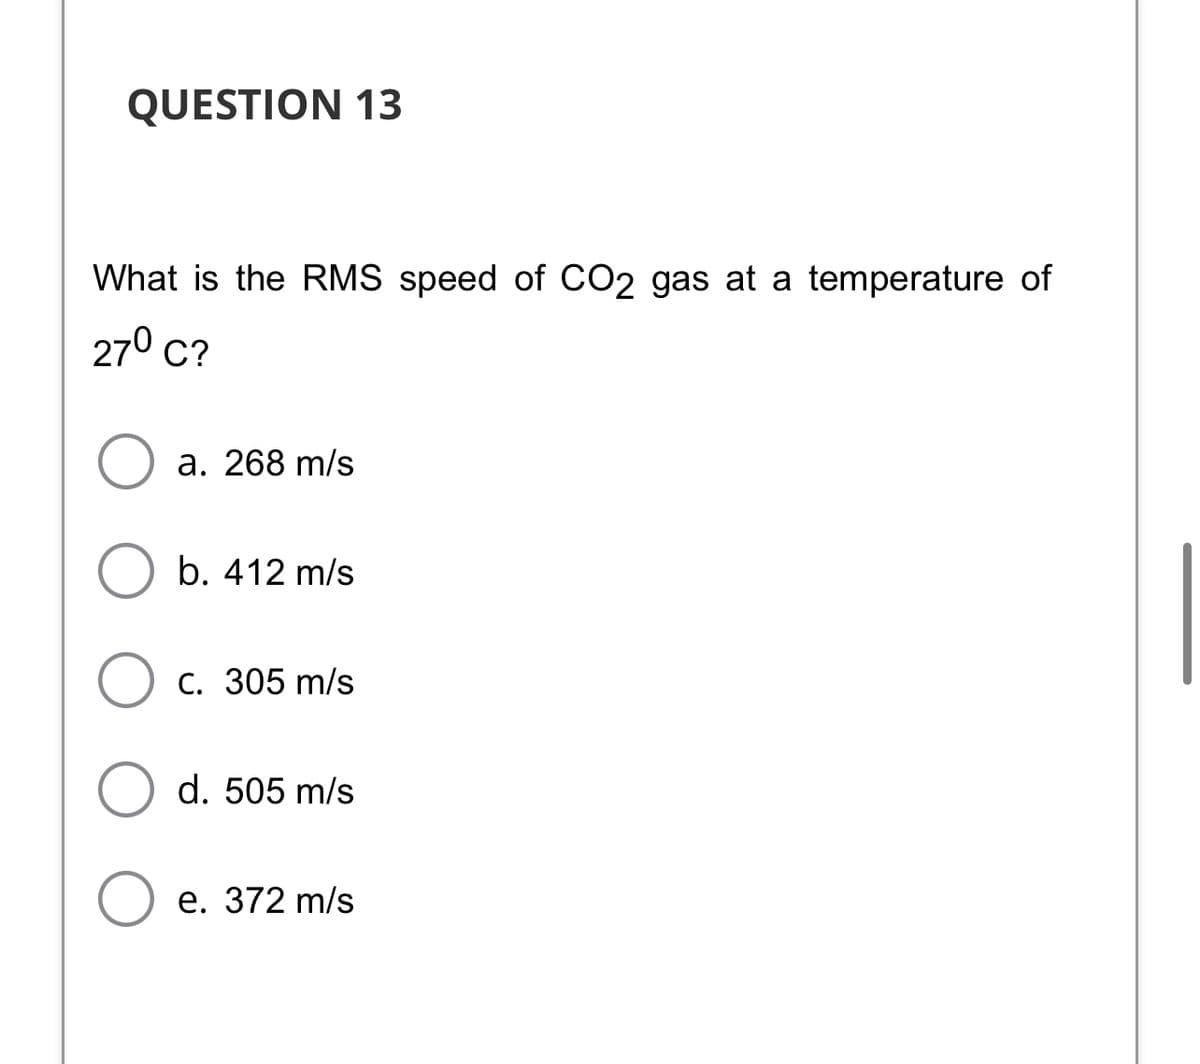 QUESTION 13
What is the RMS speed of CO2 gas at a temperature of
270 с?
a. 268 m/s
b. 412 m/s
C. 305 m/s
d. 505 m/s
е. 372 m/s
